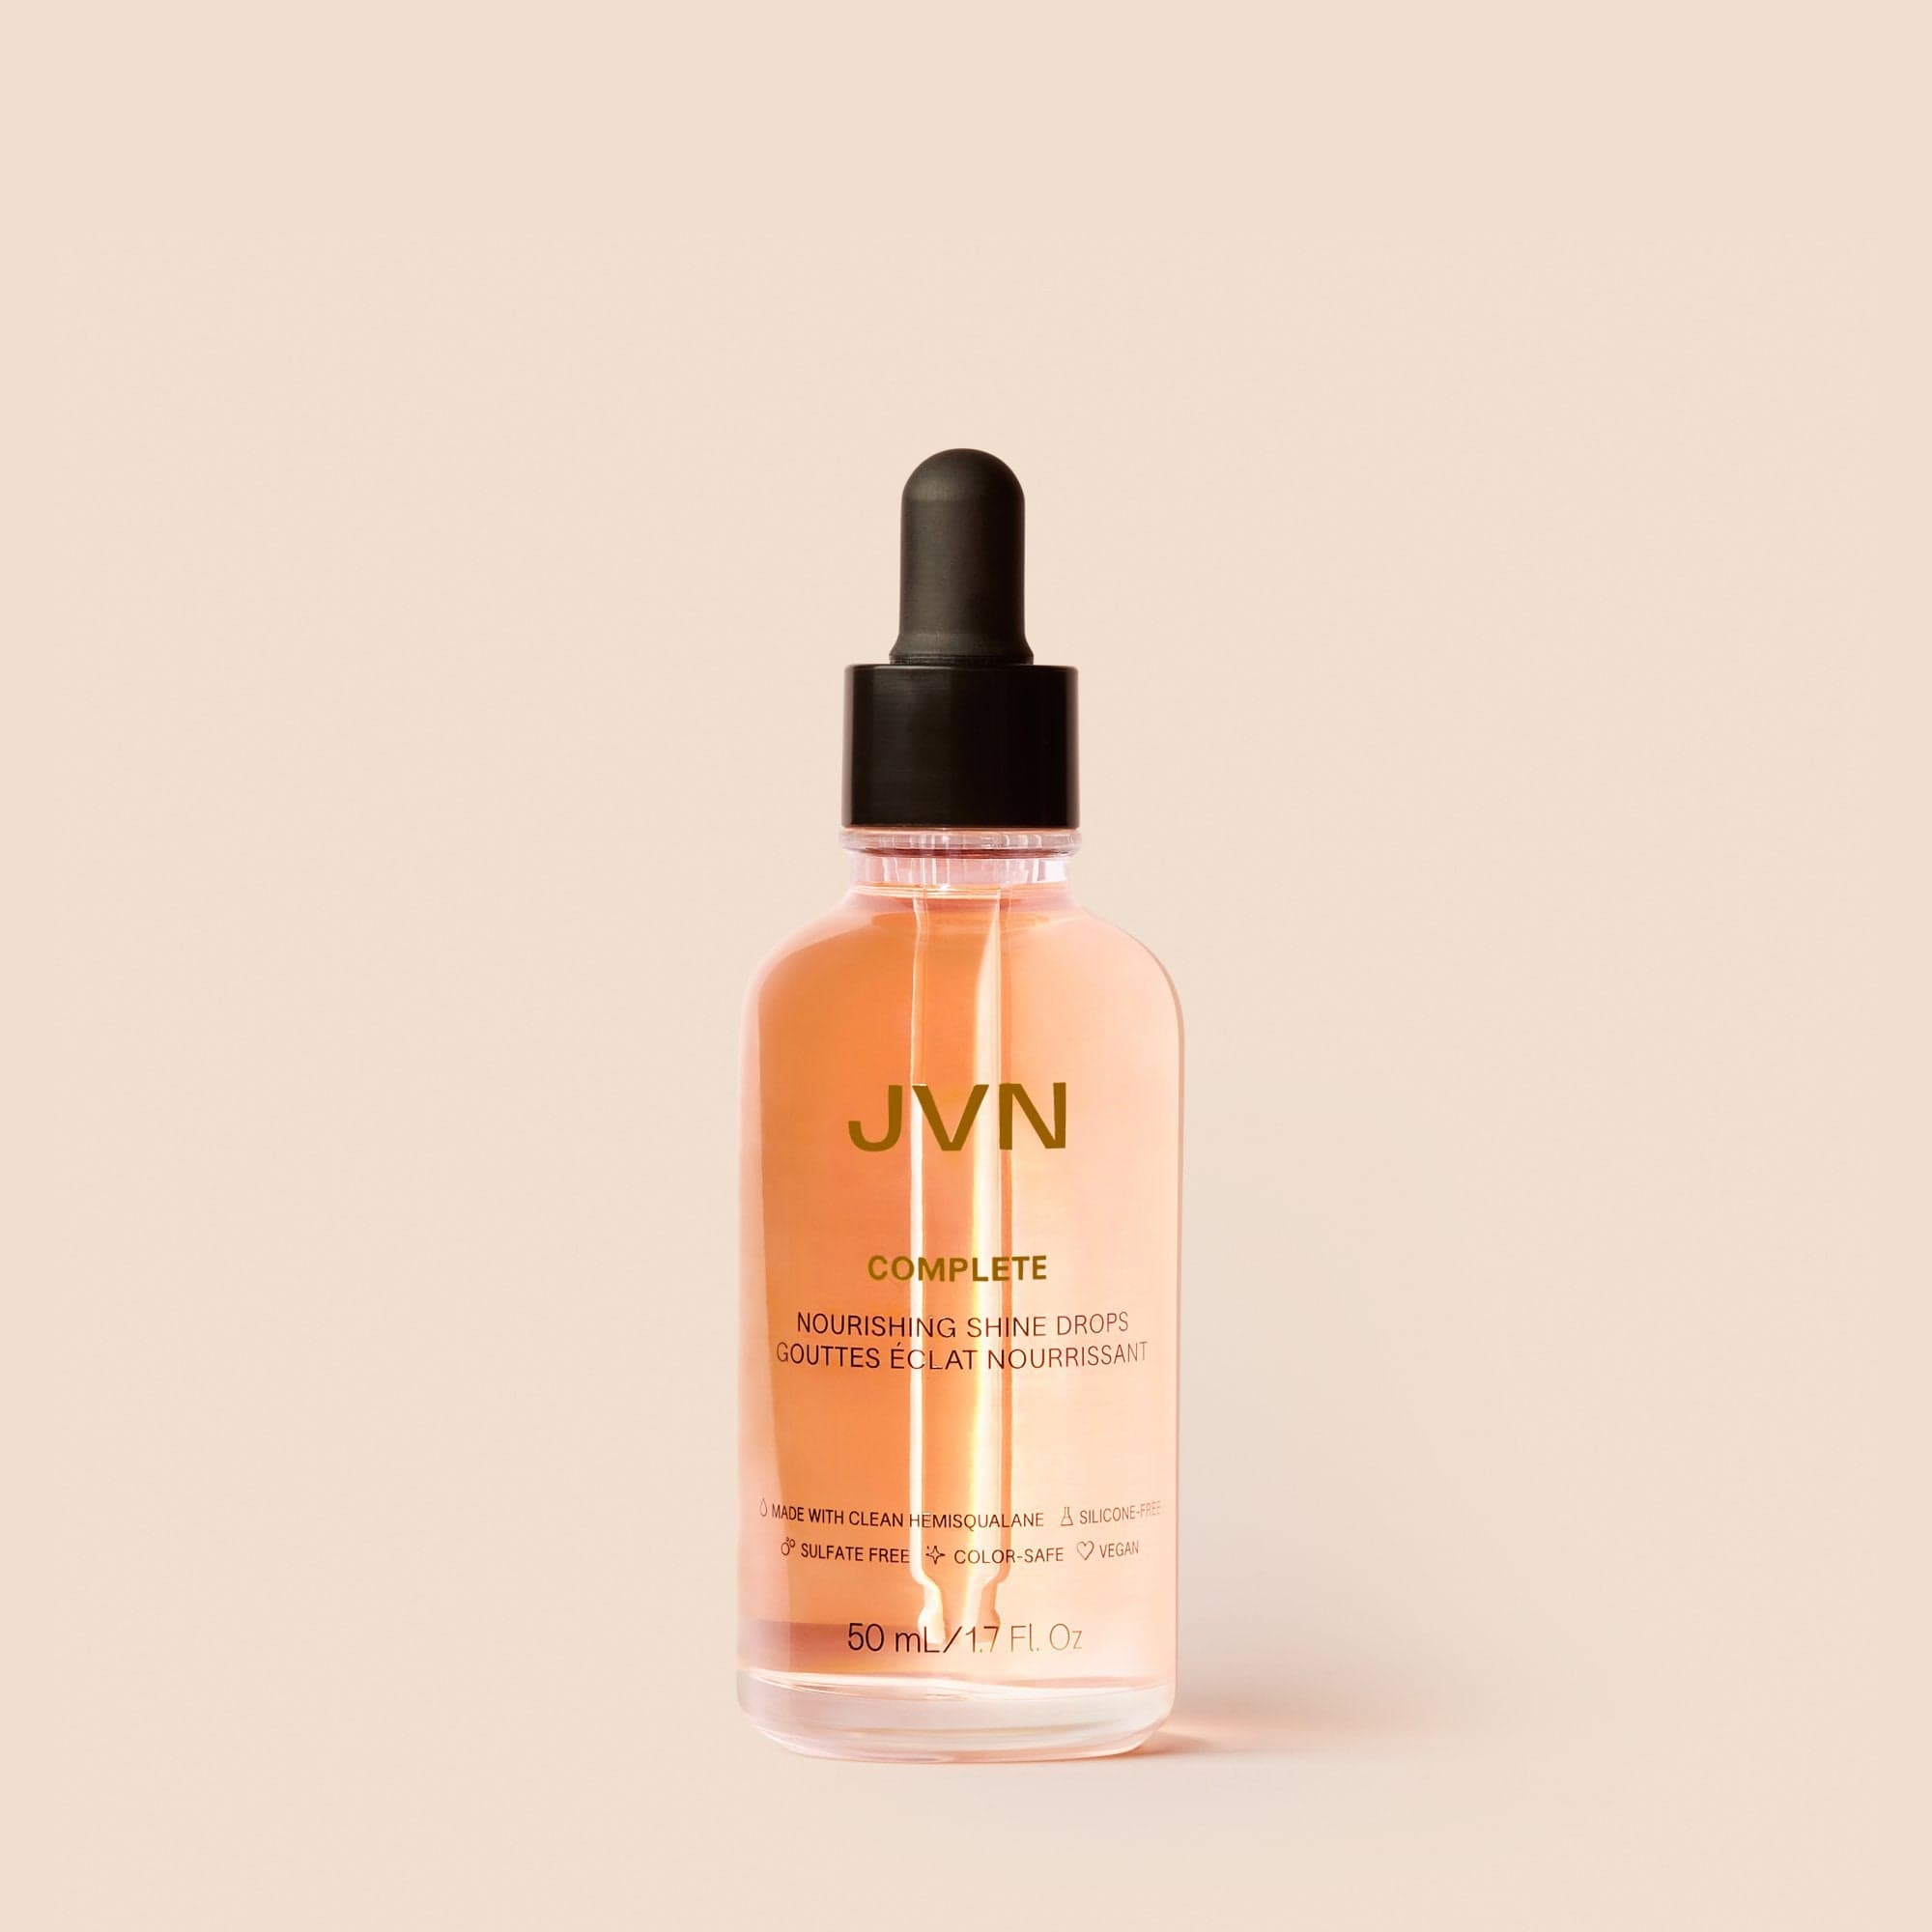 JVN Styler Complete Nourishing Shine Drops Nourishing Shine Drops | Smoothing Oil For Sleek & Shiny Hair  | JVN sulfate-free silicone-free sustainable